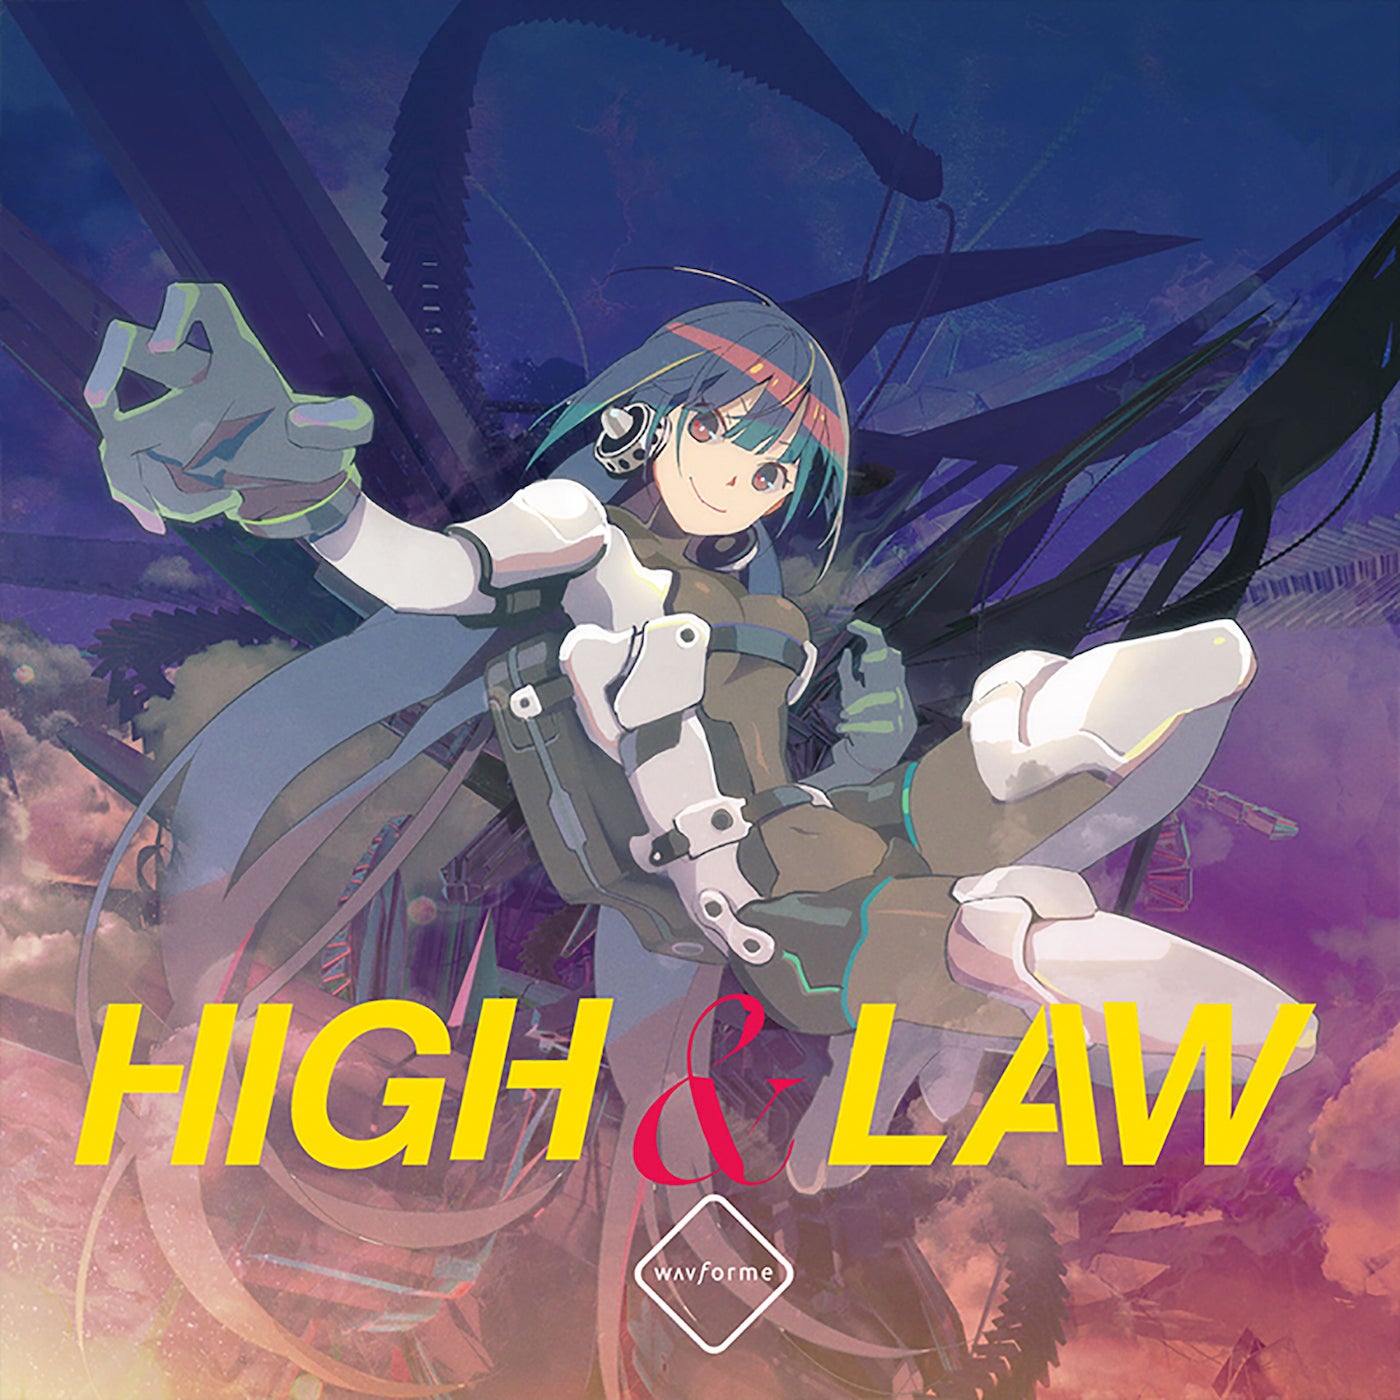 High and law